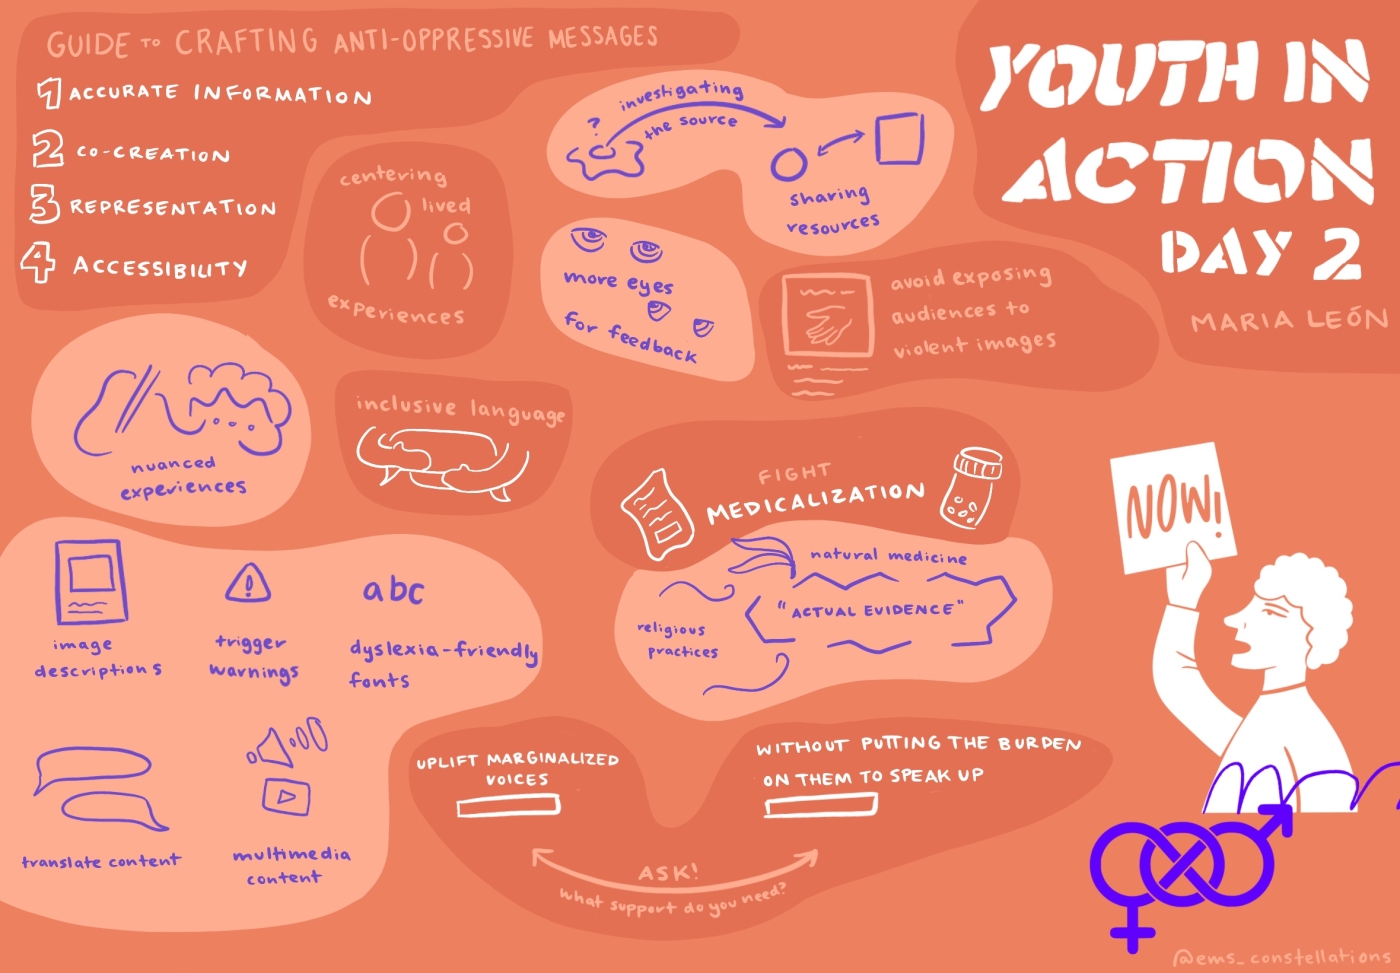 Orange and purple visual brainstorm of Youth in Action Day 2 on crafting anti-oppressive messages. Concepts include image descriptions, trigger warnings, uplifting marginalized voices, and sharing resources.